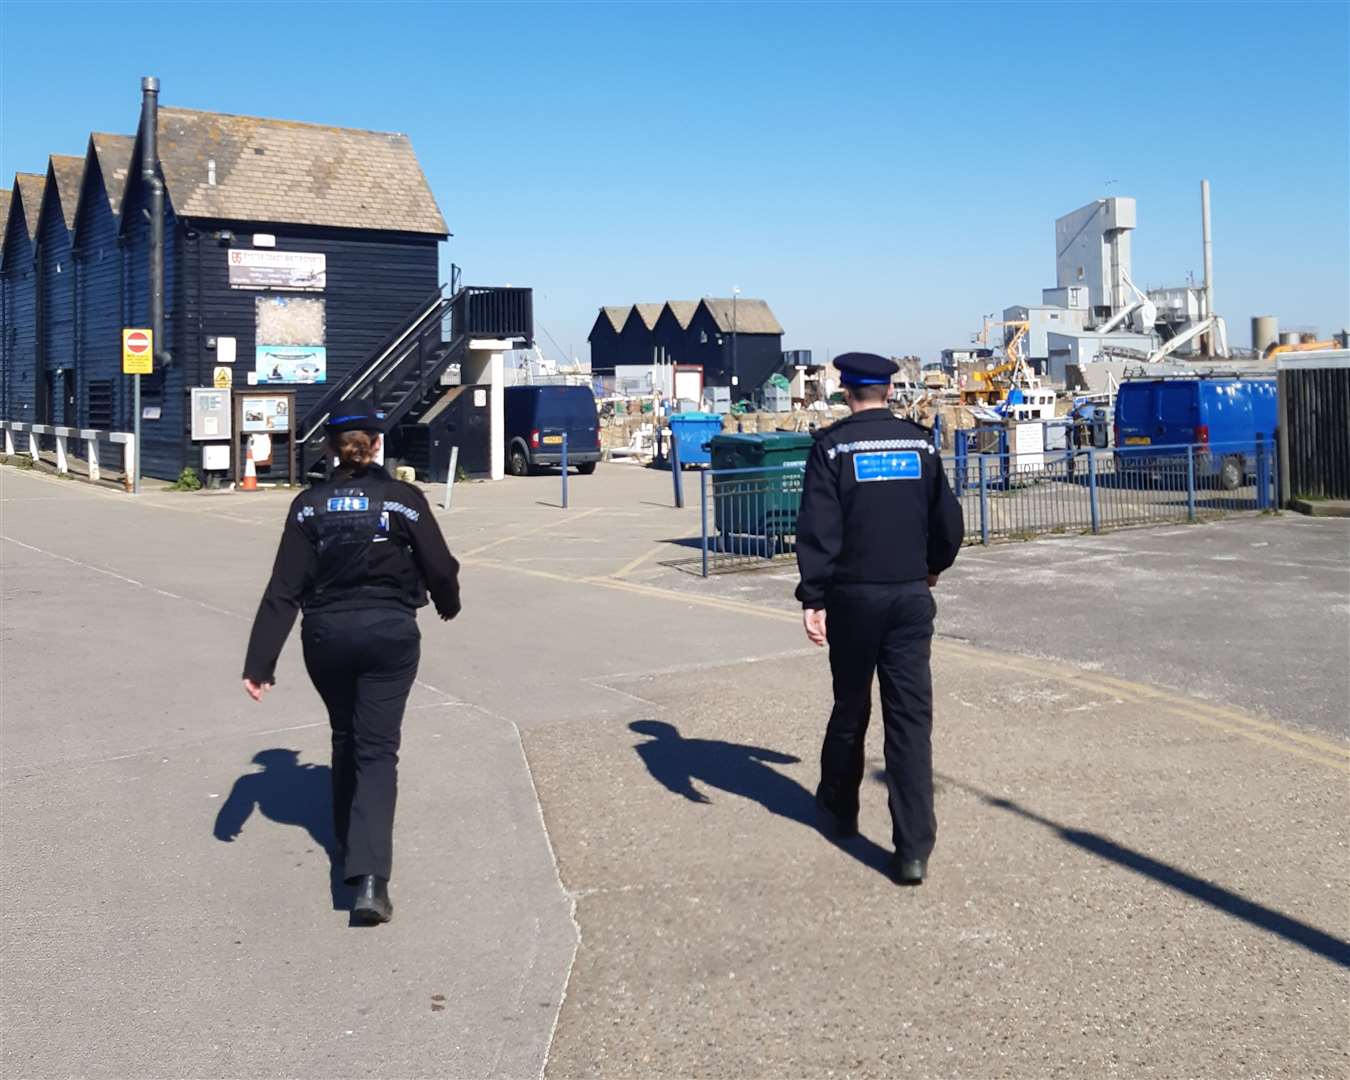 Police pictured out on patrol in Whitstable during lockdown last year